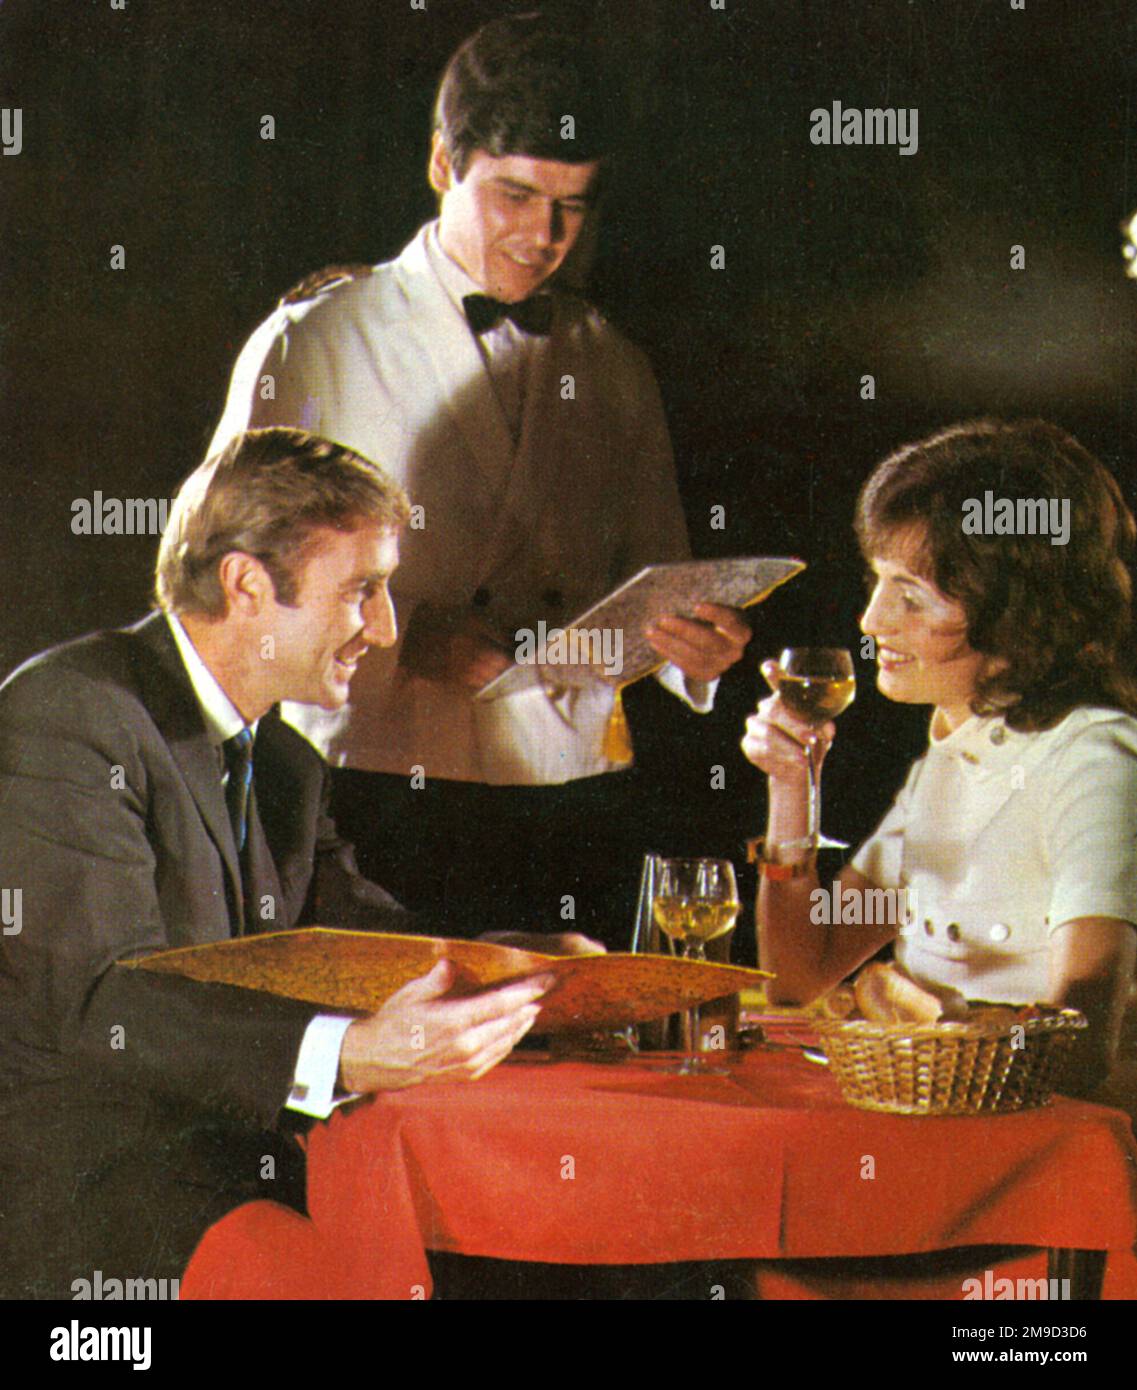 Advertisement for Forte's Restaurants, showing a couple at a table with a waiter taking their order. This national chain of restaurants also used the names: Quality Inn, Kardomah and Fuller. Stock Photo